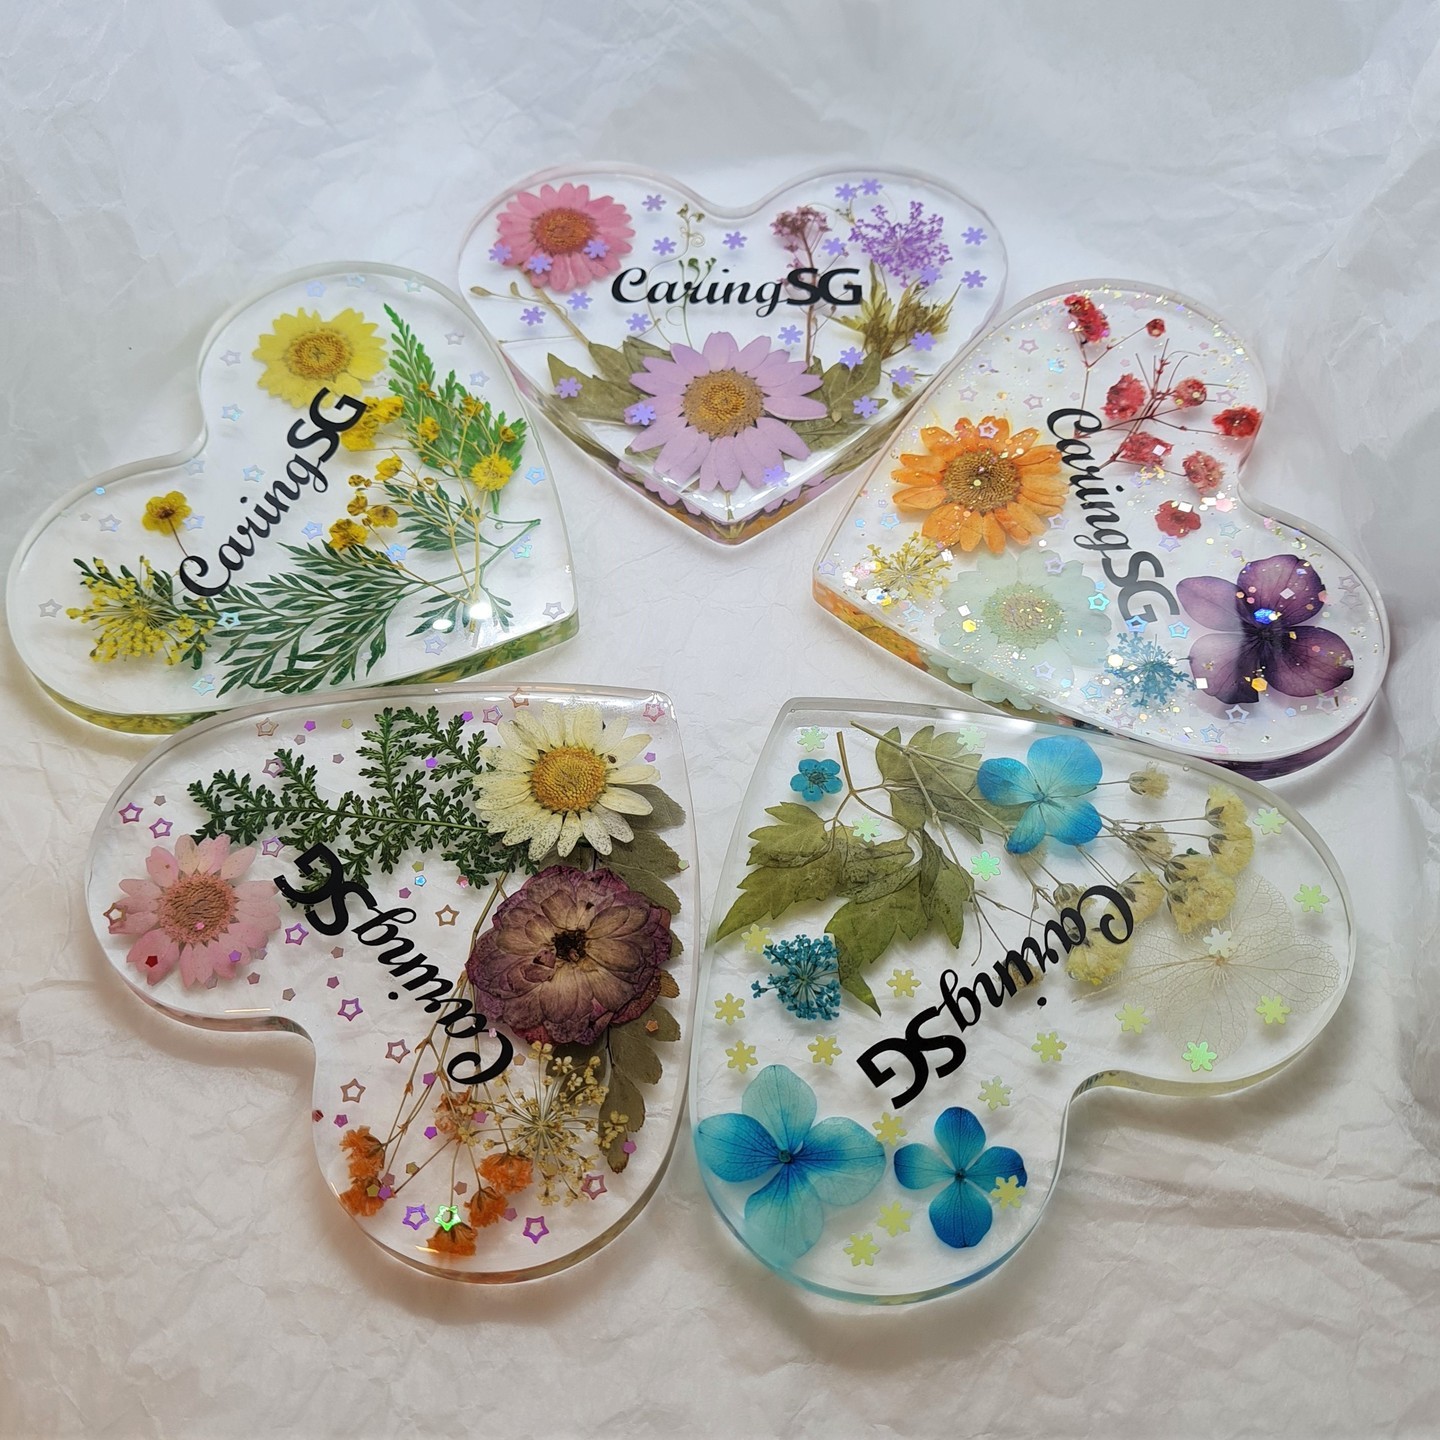 Heart Coaster for Caring SG